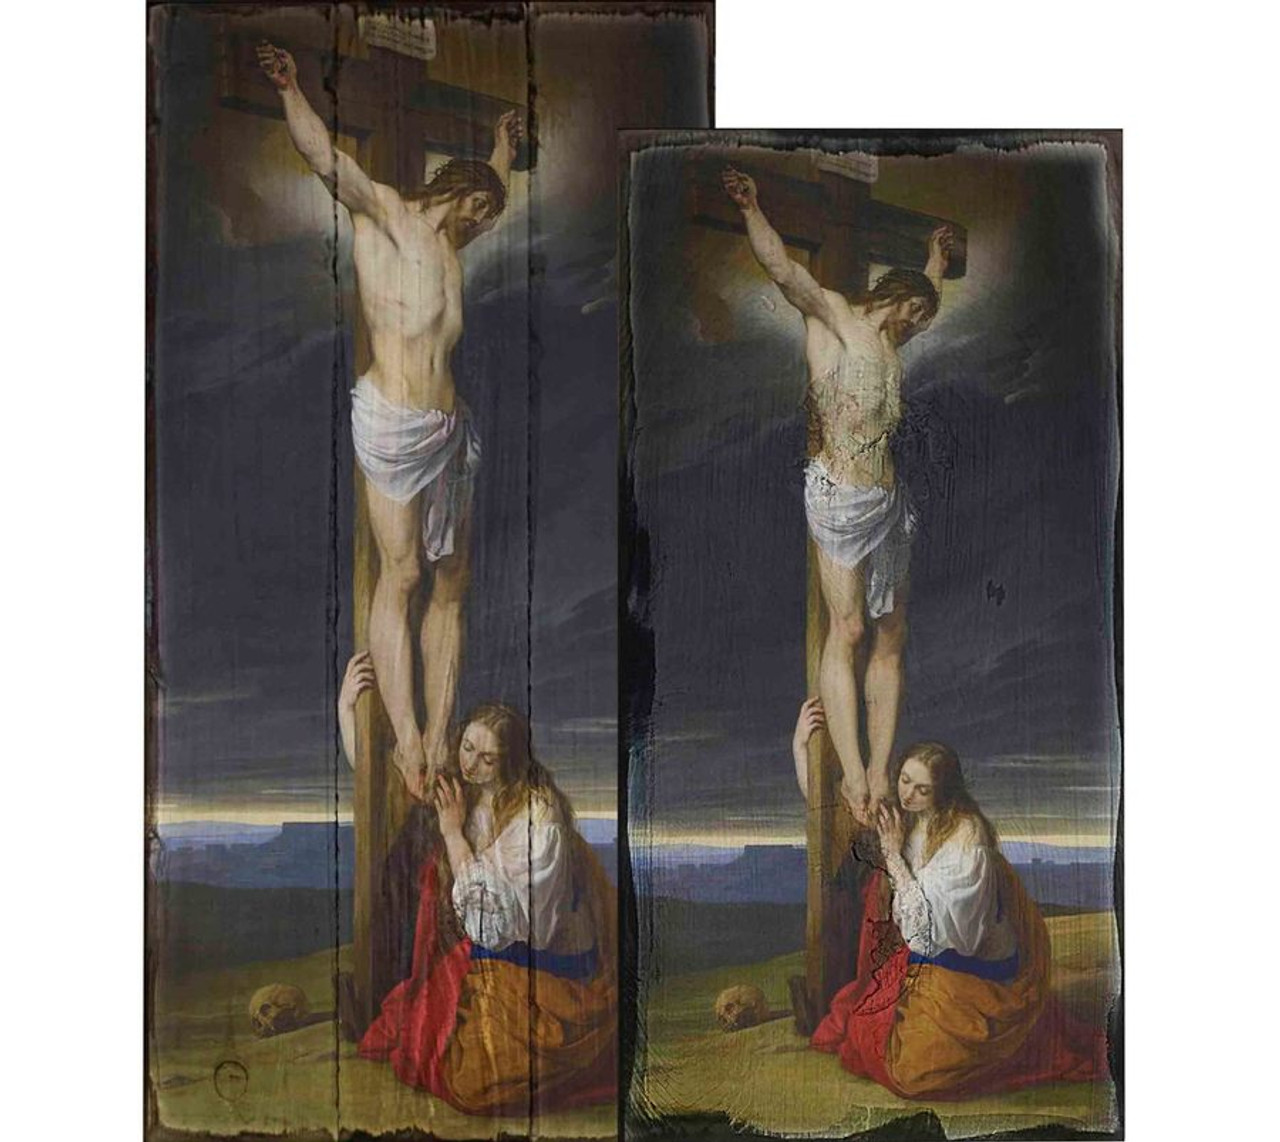 Crucifixion with Mary Magdalene Kneeling and Weeping by Francesco Hayez Rustic Wood Plaque